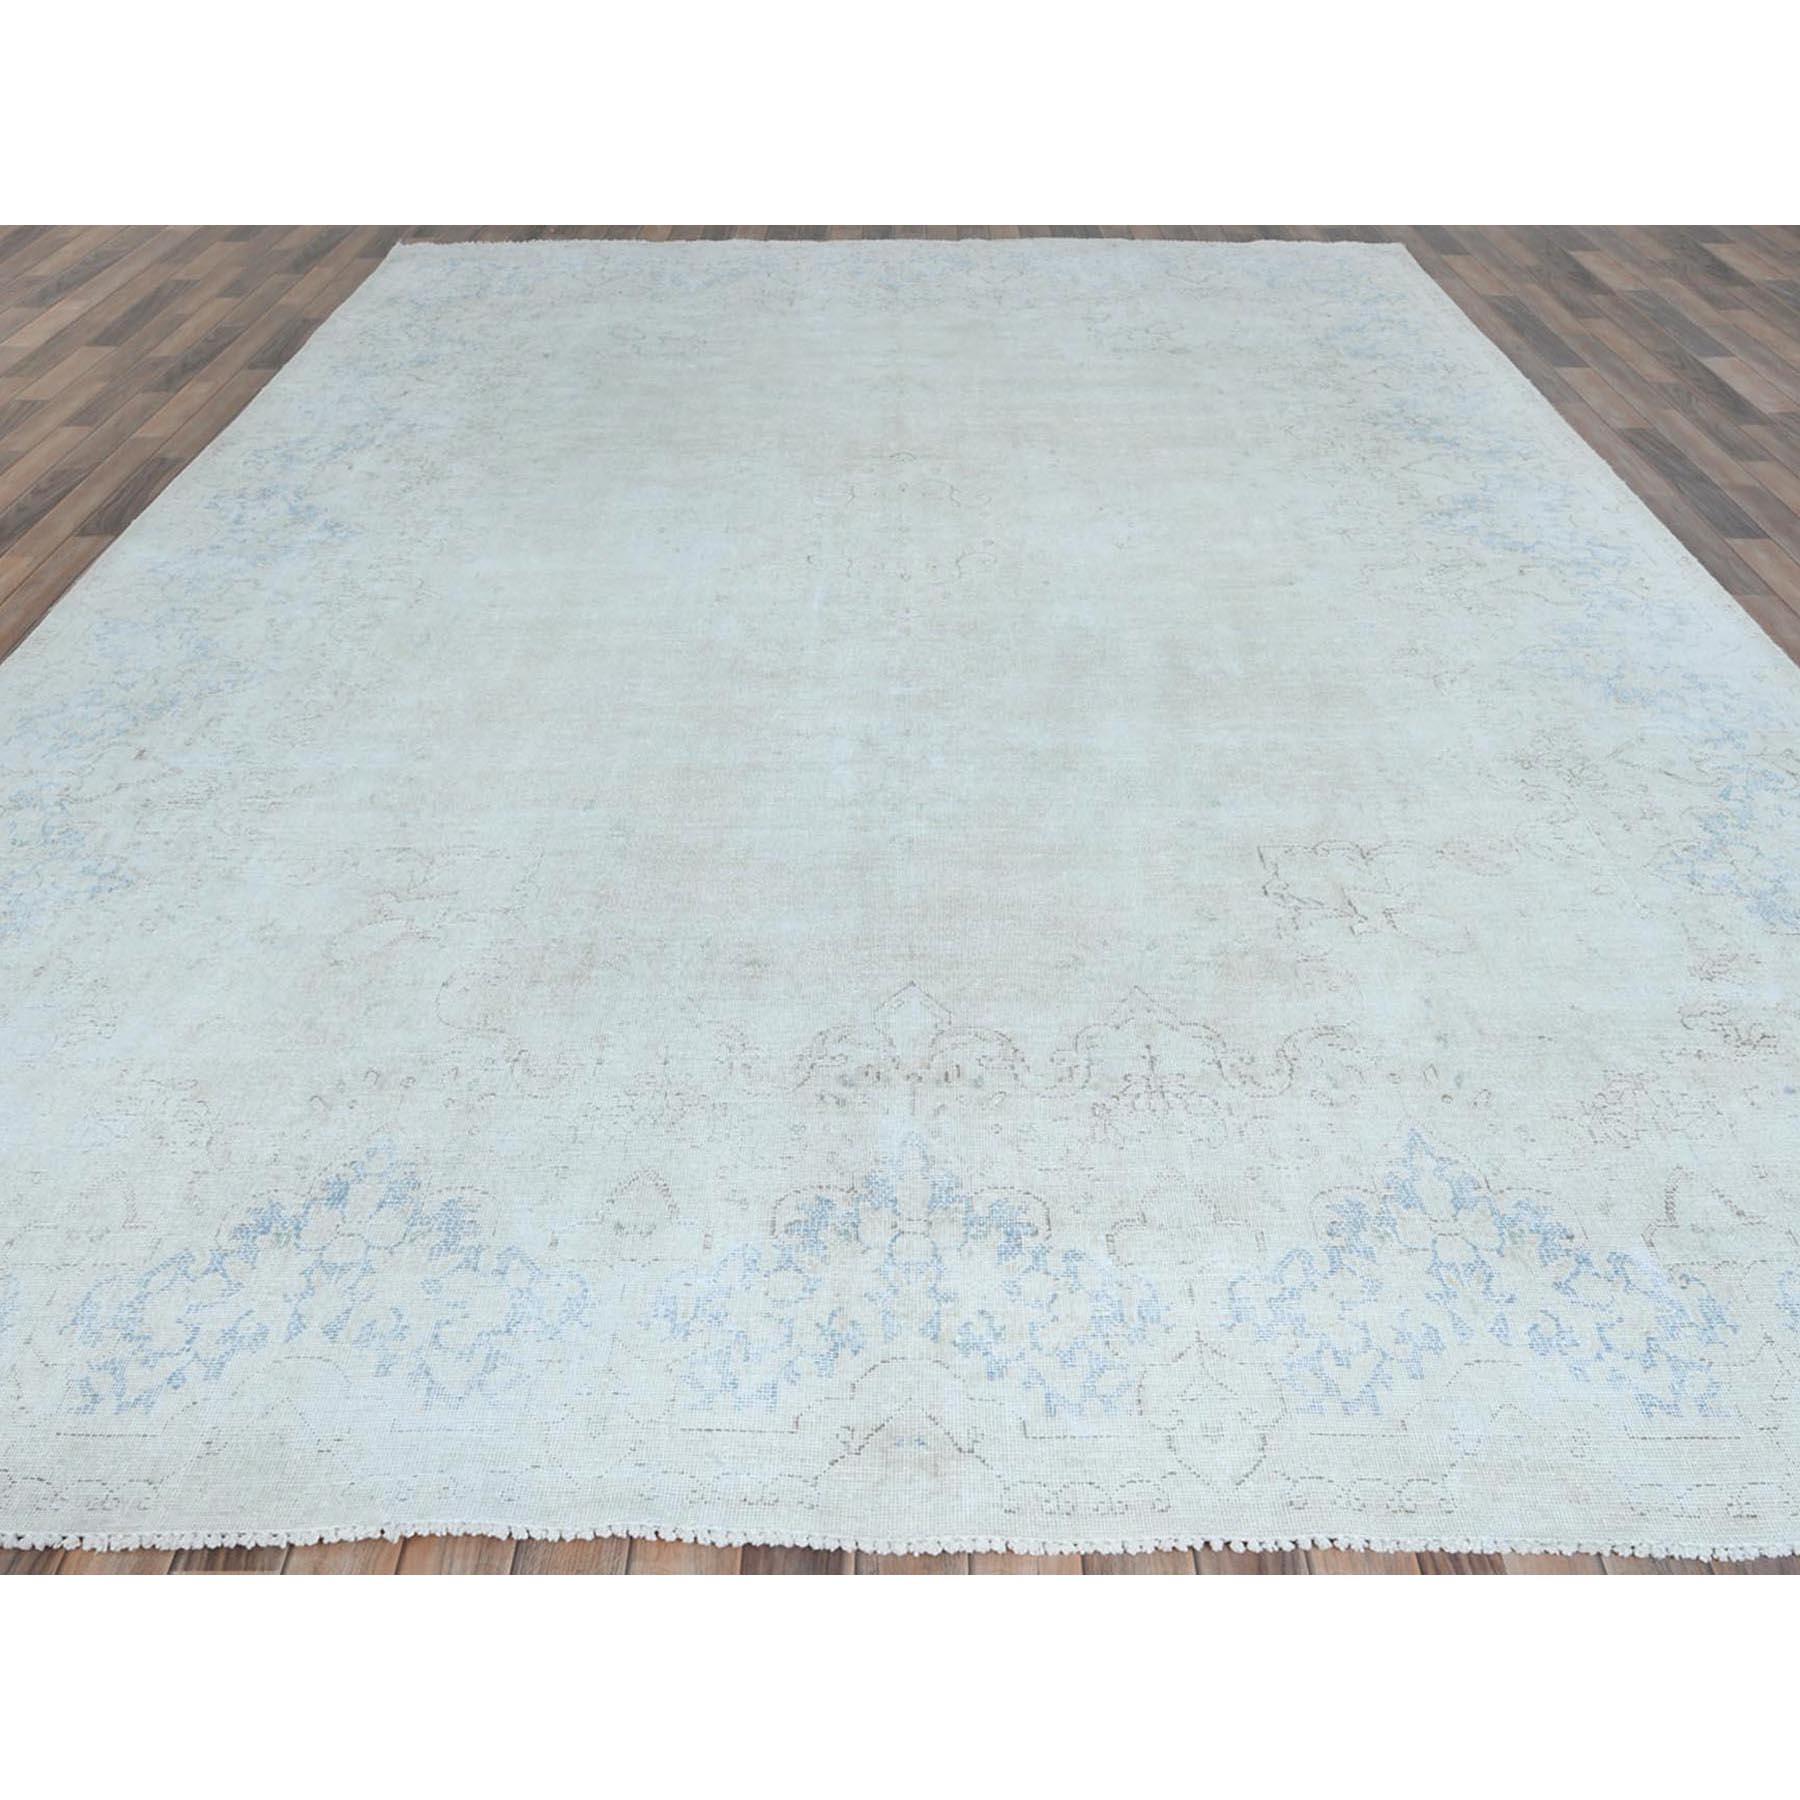 Medieval Ivory Hand Knotted Worn Wool Shabby Chic Distressed Look Old Persian Kerman Rug For Sale